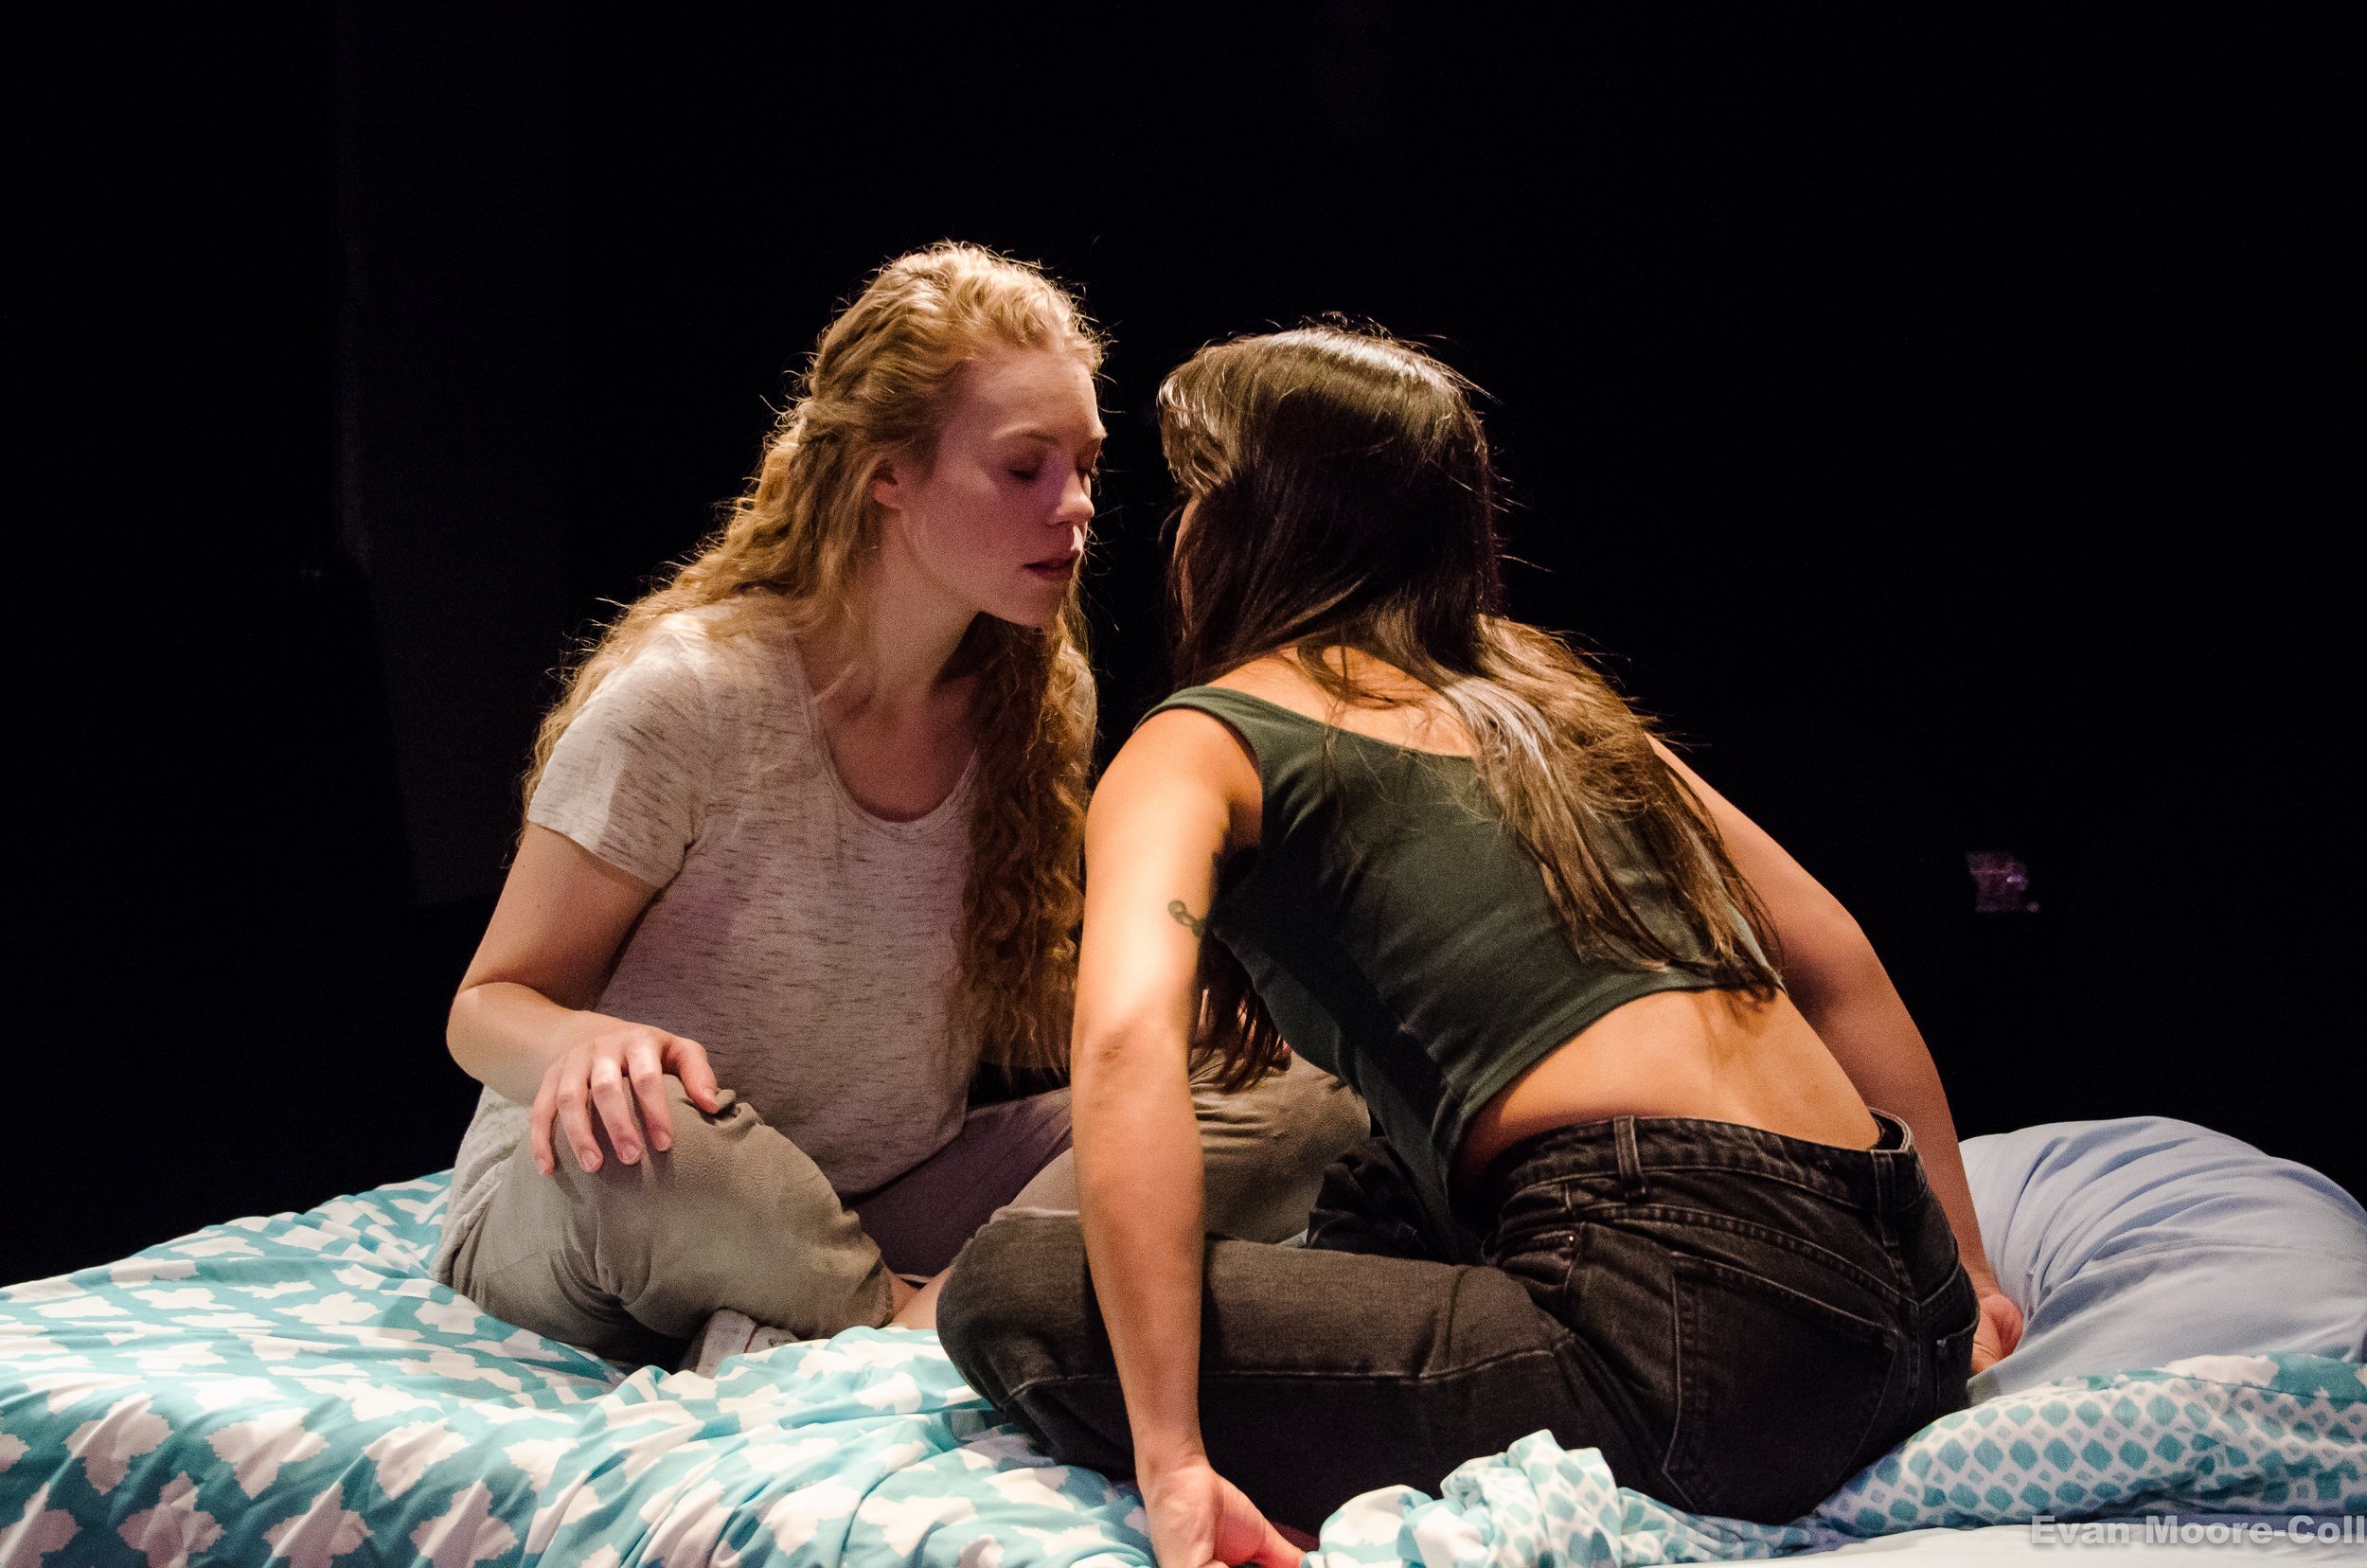   Nina Roy &amp; Kate Berg in the 2020 Workshop Production (Photo by Evan Moore-Coll)  